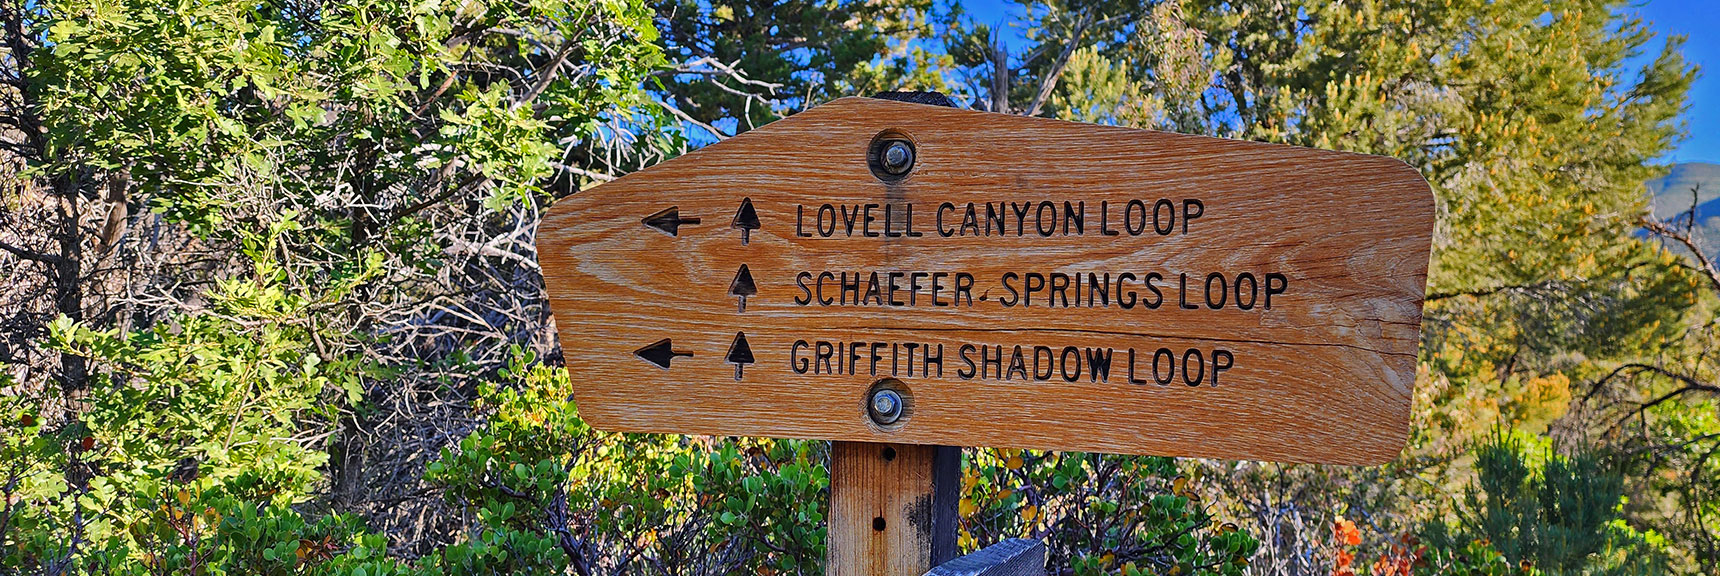 Griffith Shadow Loop Goes Toward Sexton Ridge. Will Descend to Lovell Canyon Wash Instead Today. | Wilson Ridge to Harris Mountain | Lovell Canyon, Nevada